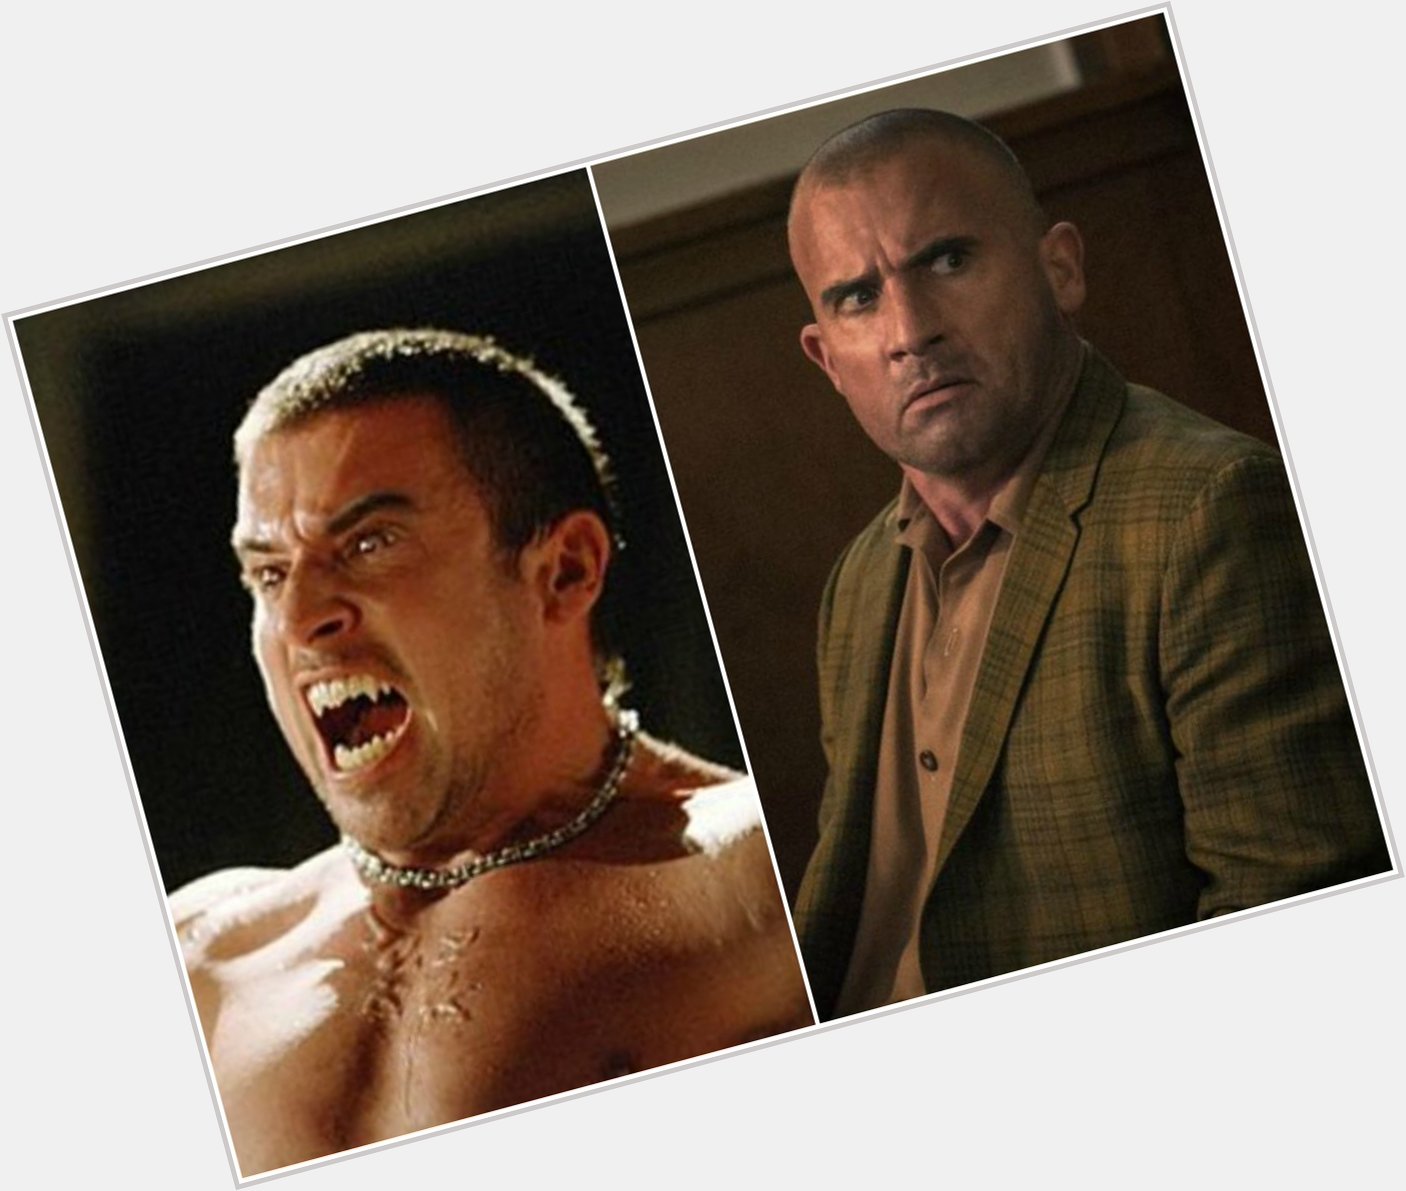 Mah people!!! Today Dominic Purcell turns 50!!!! Happy birthday Drake Rory!!!! 